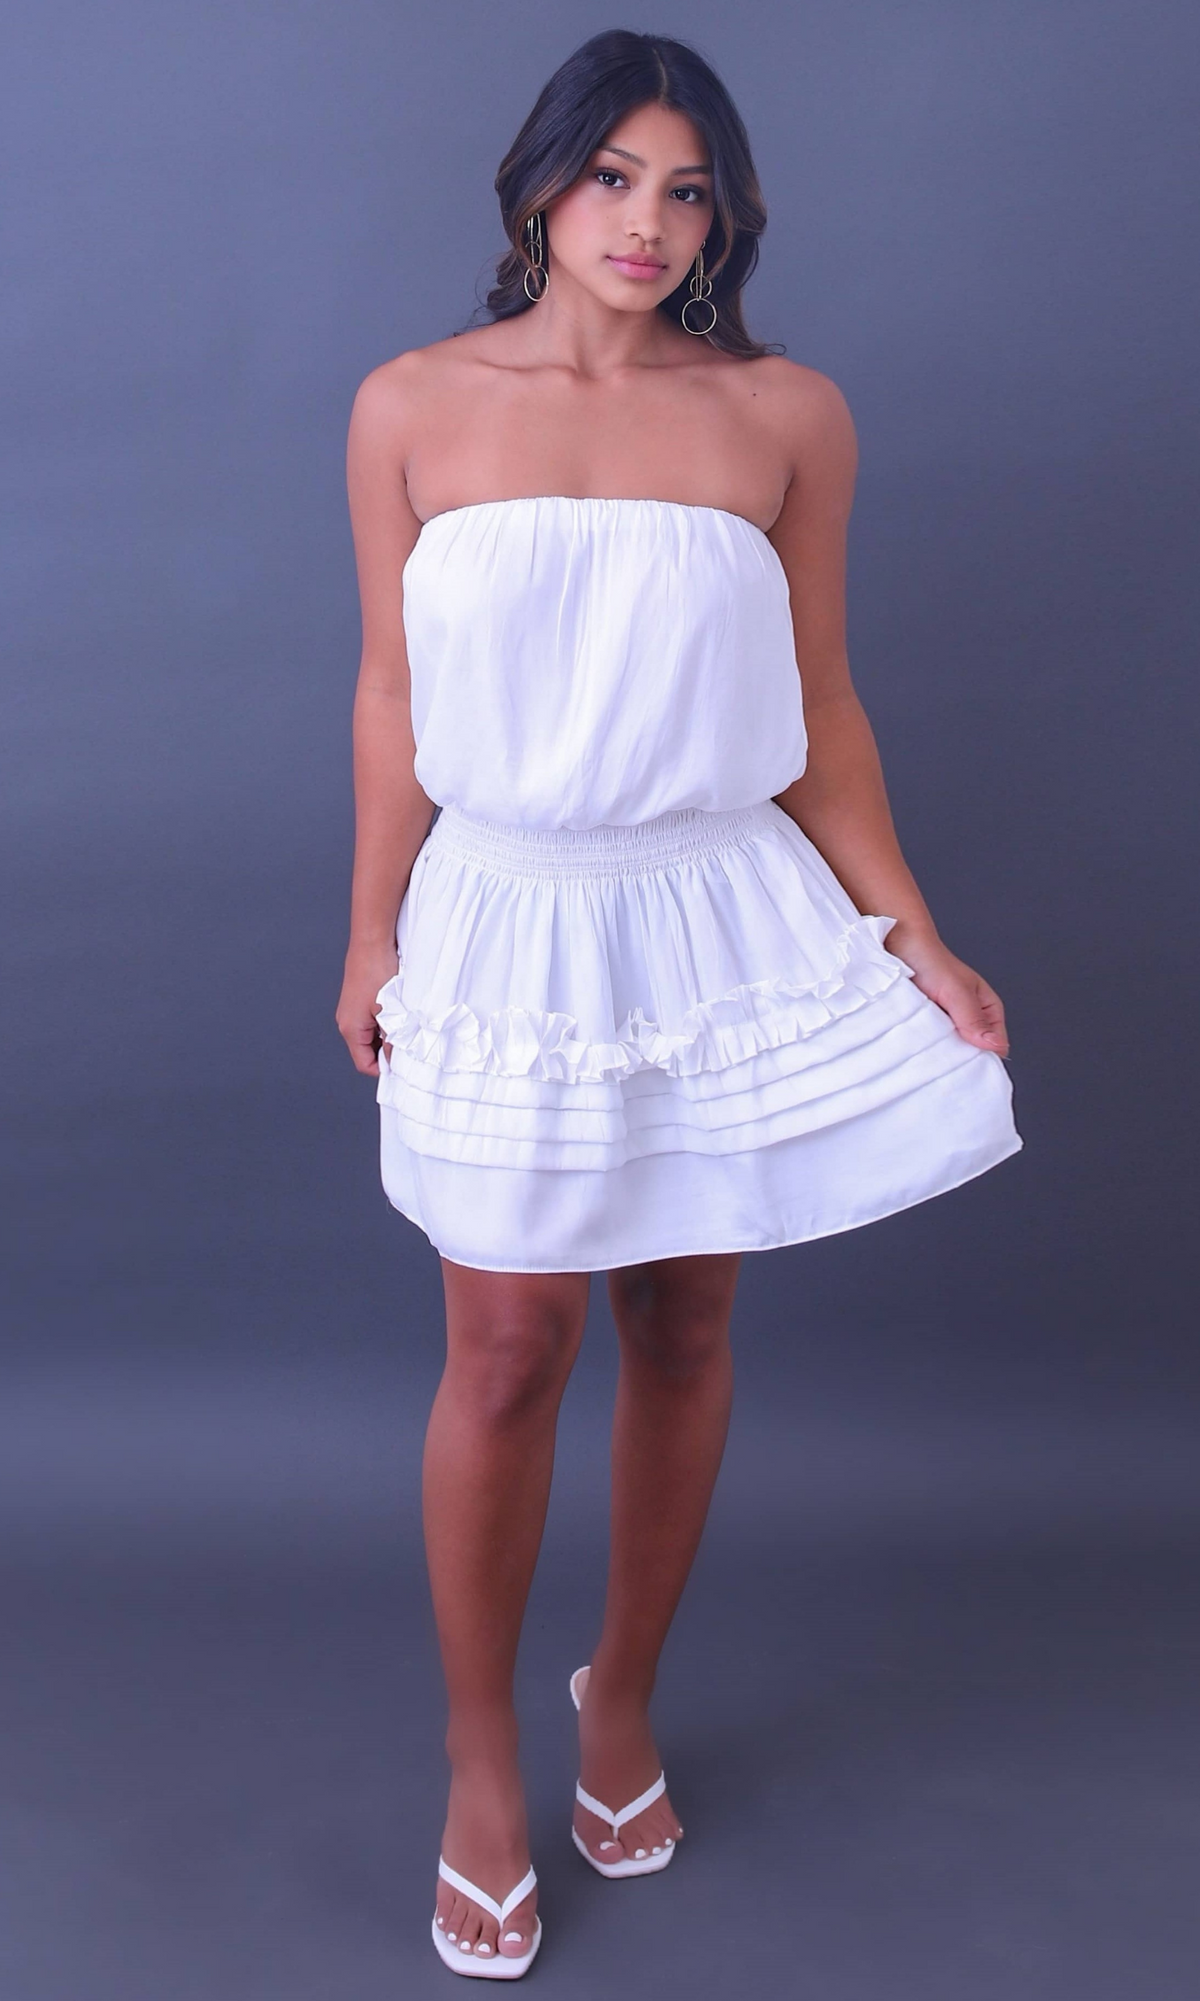 Lilly Bell White Strapless Ruffle Mini Dressed